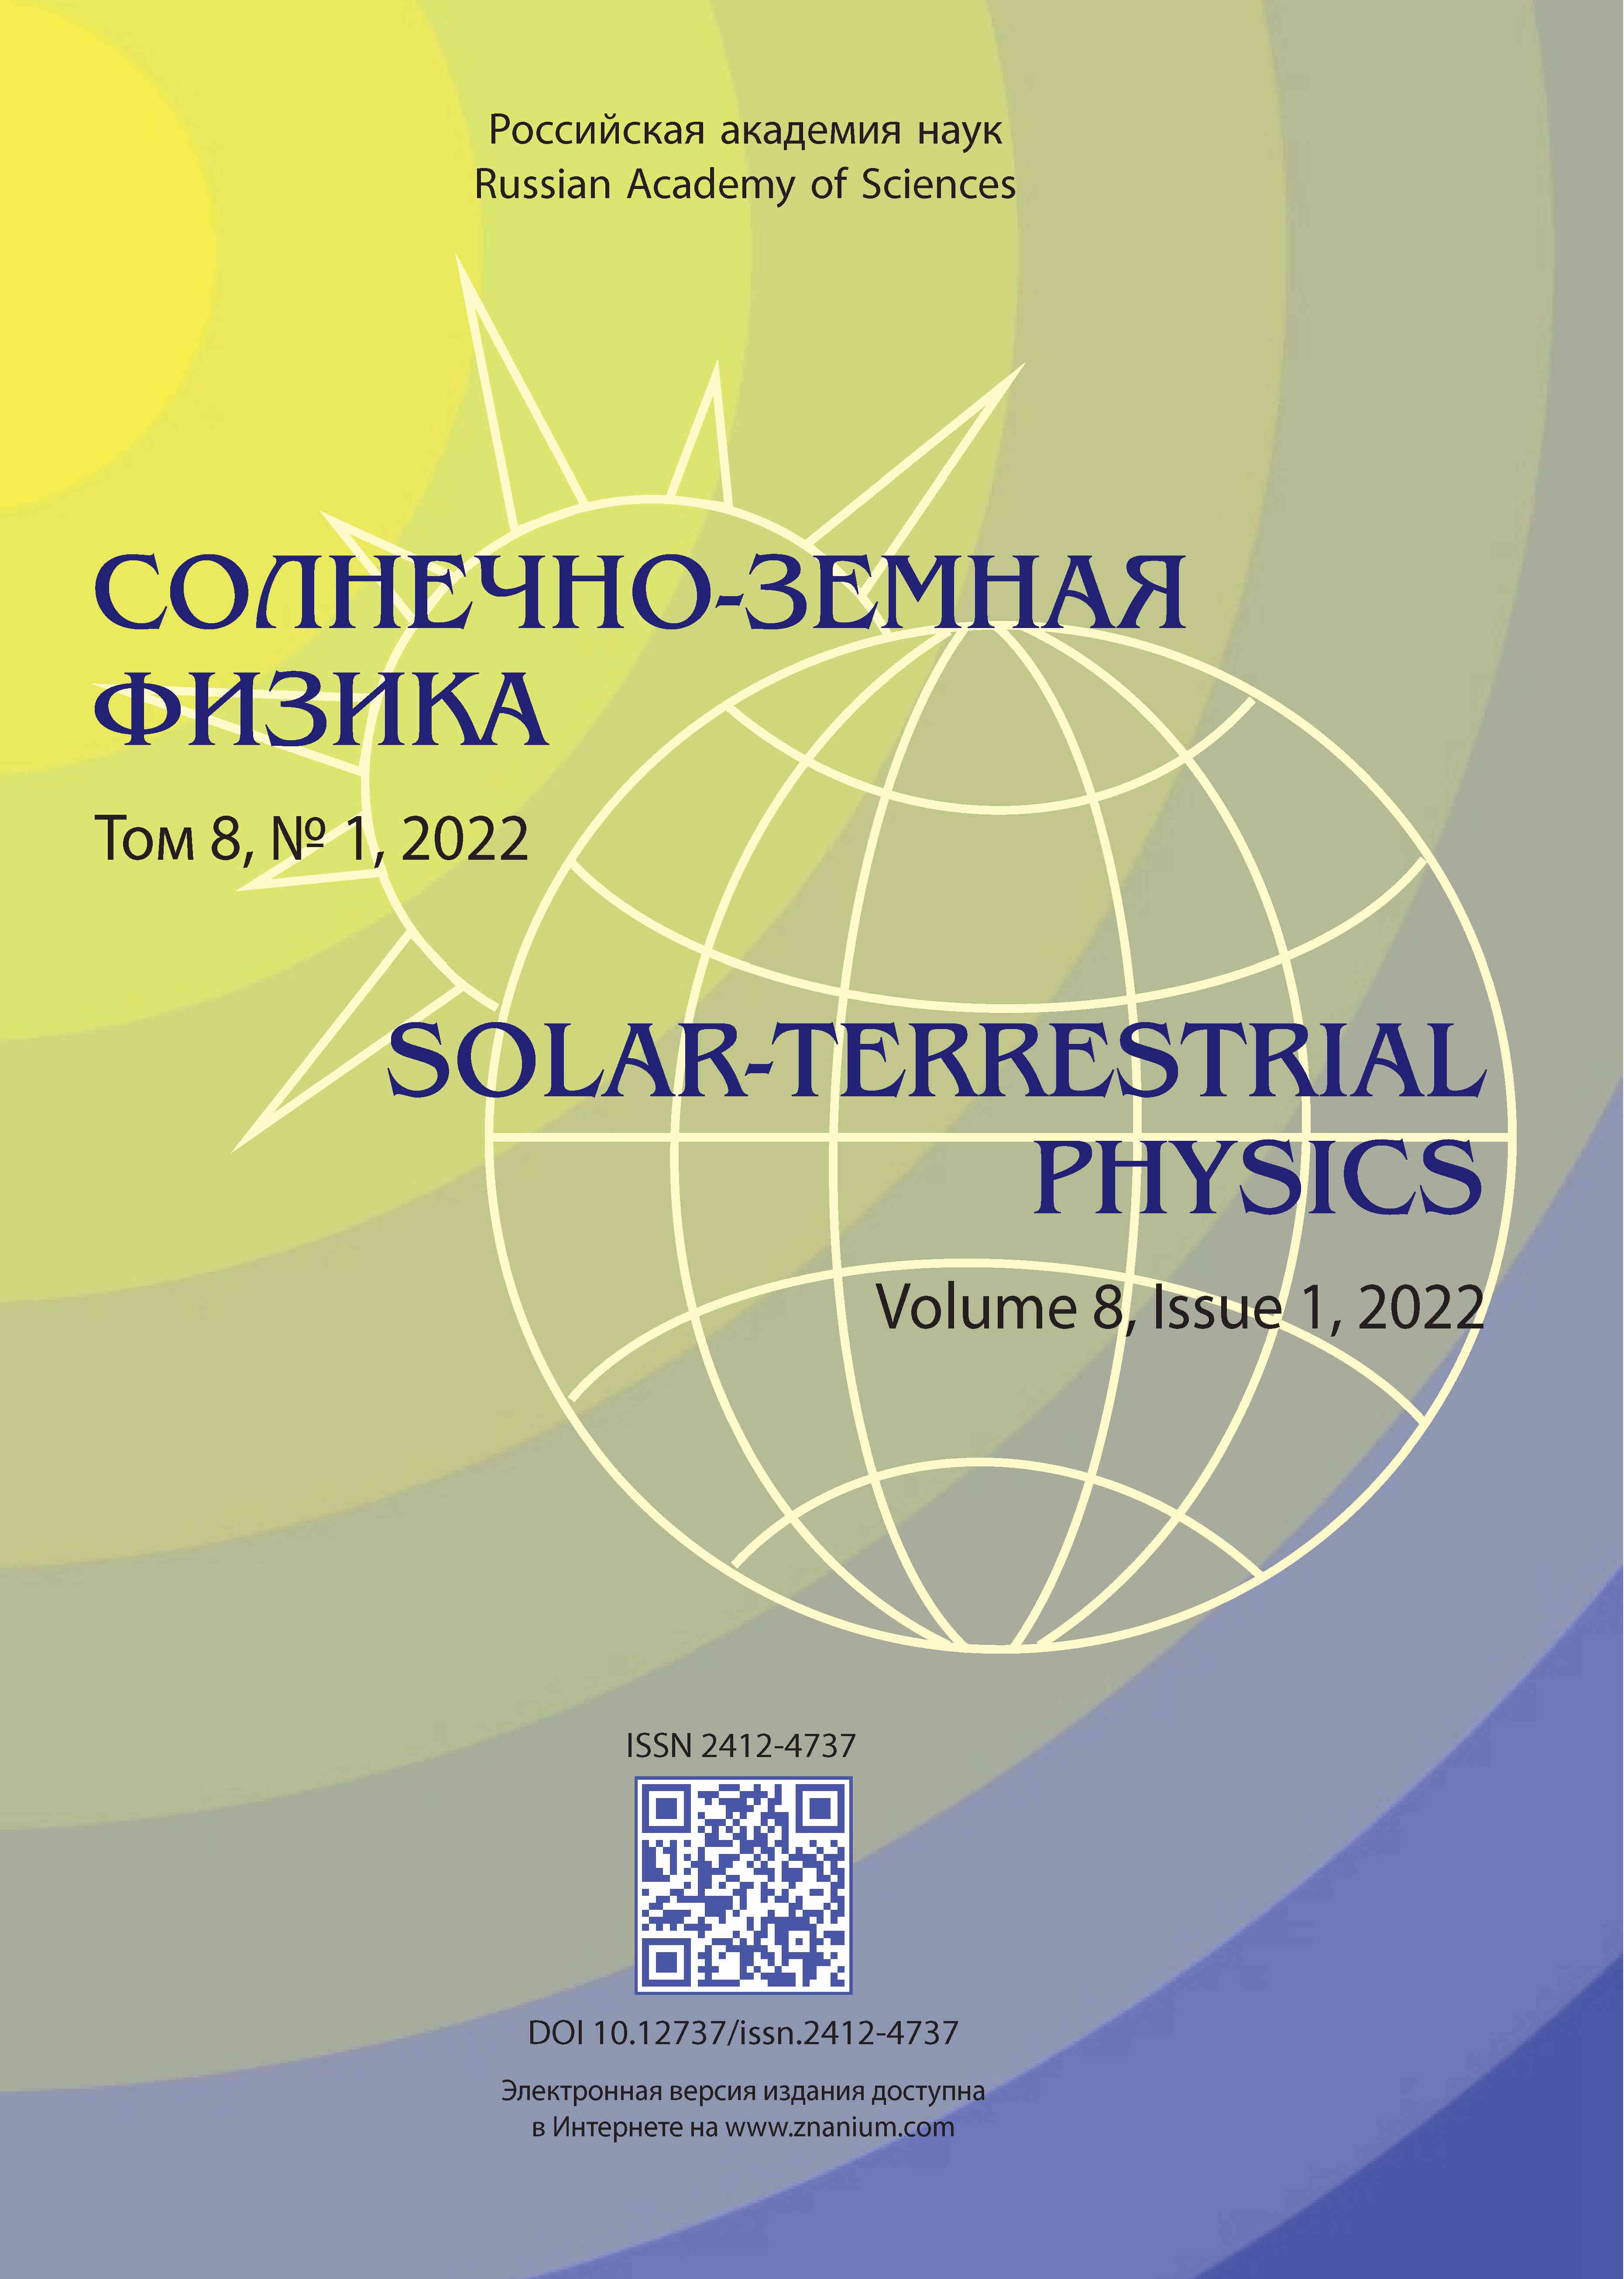                         Database of geomagnetic observations in Russian Arctic and its application for estimates of the space weather impact on technological systems
            